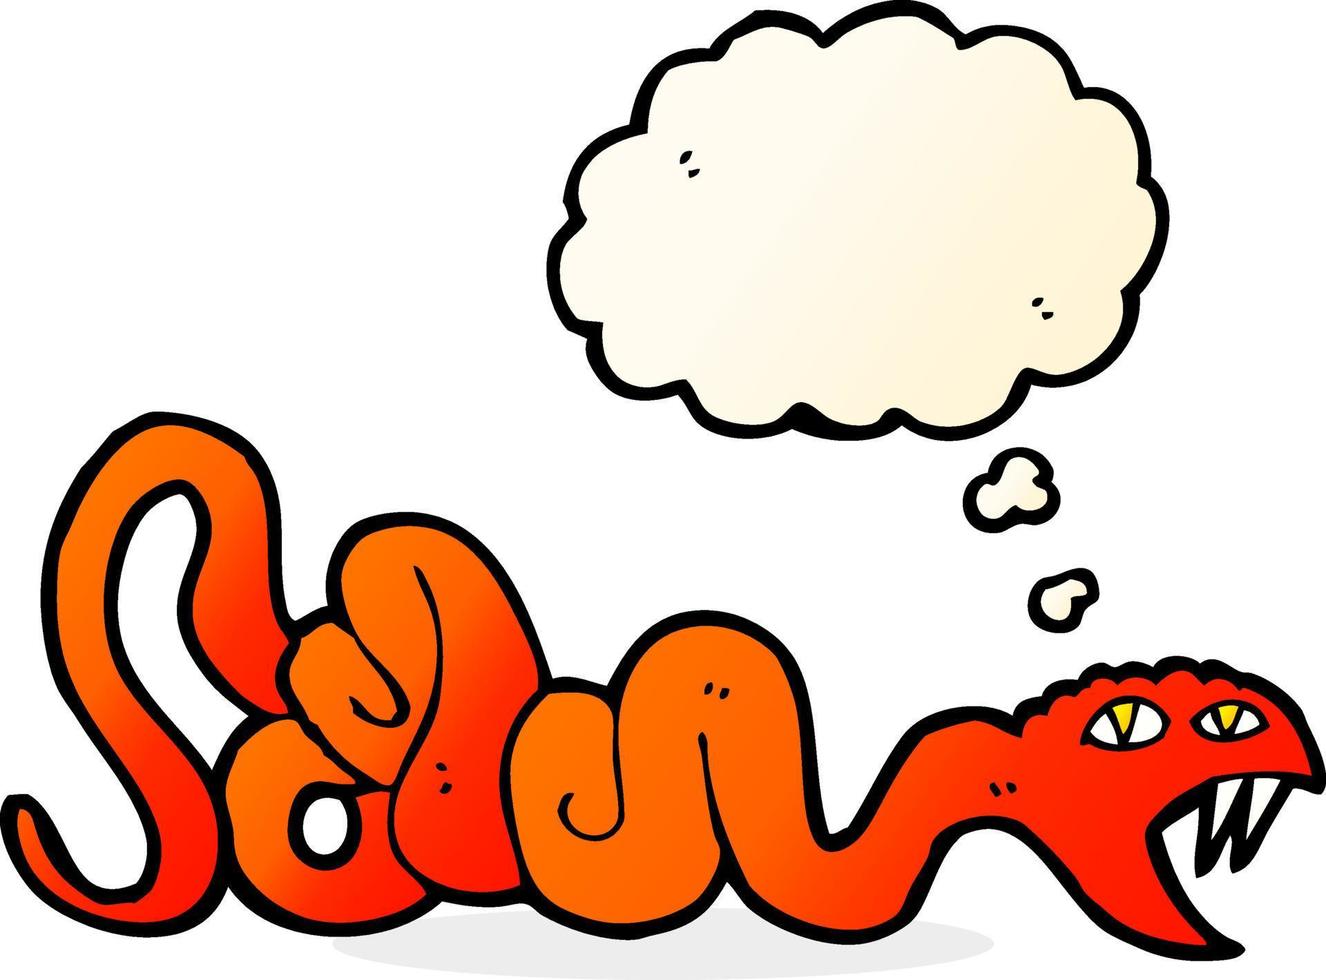 cartoon snake with thought bubble vector